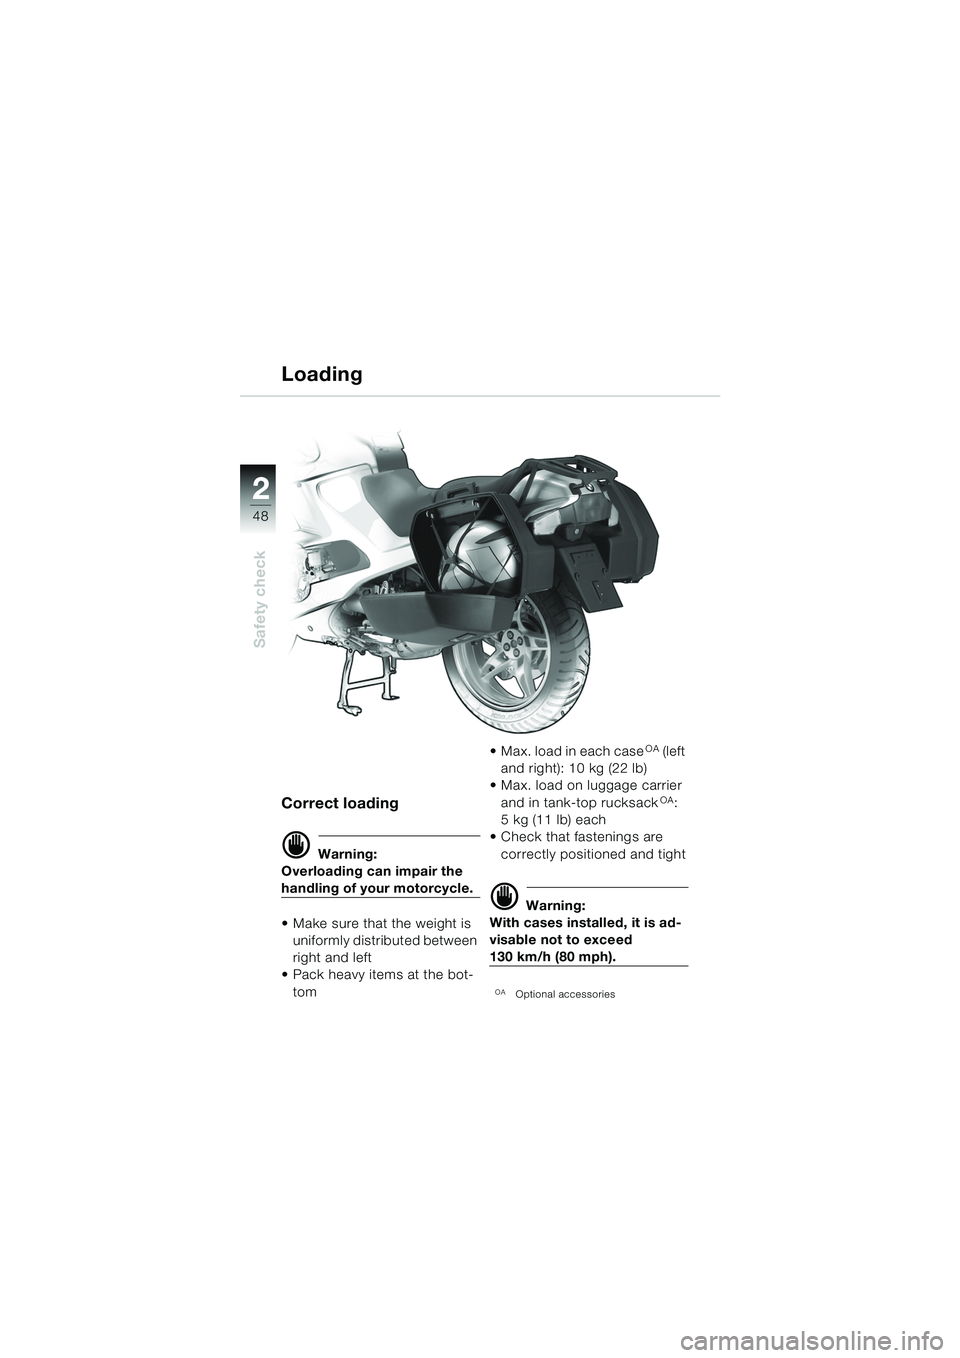 BMW MOTORRAD R 1150 RS 2002  Riders Manual (in English) 22
48
Safety check
Correct loading
d Warning:
Overloading can impair the 
handling of your motorcycle.
 Make sure that the weight is  uniformly distributed between 
right and left
 Pack heavy items 